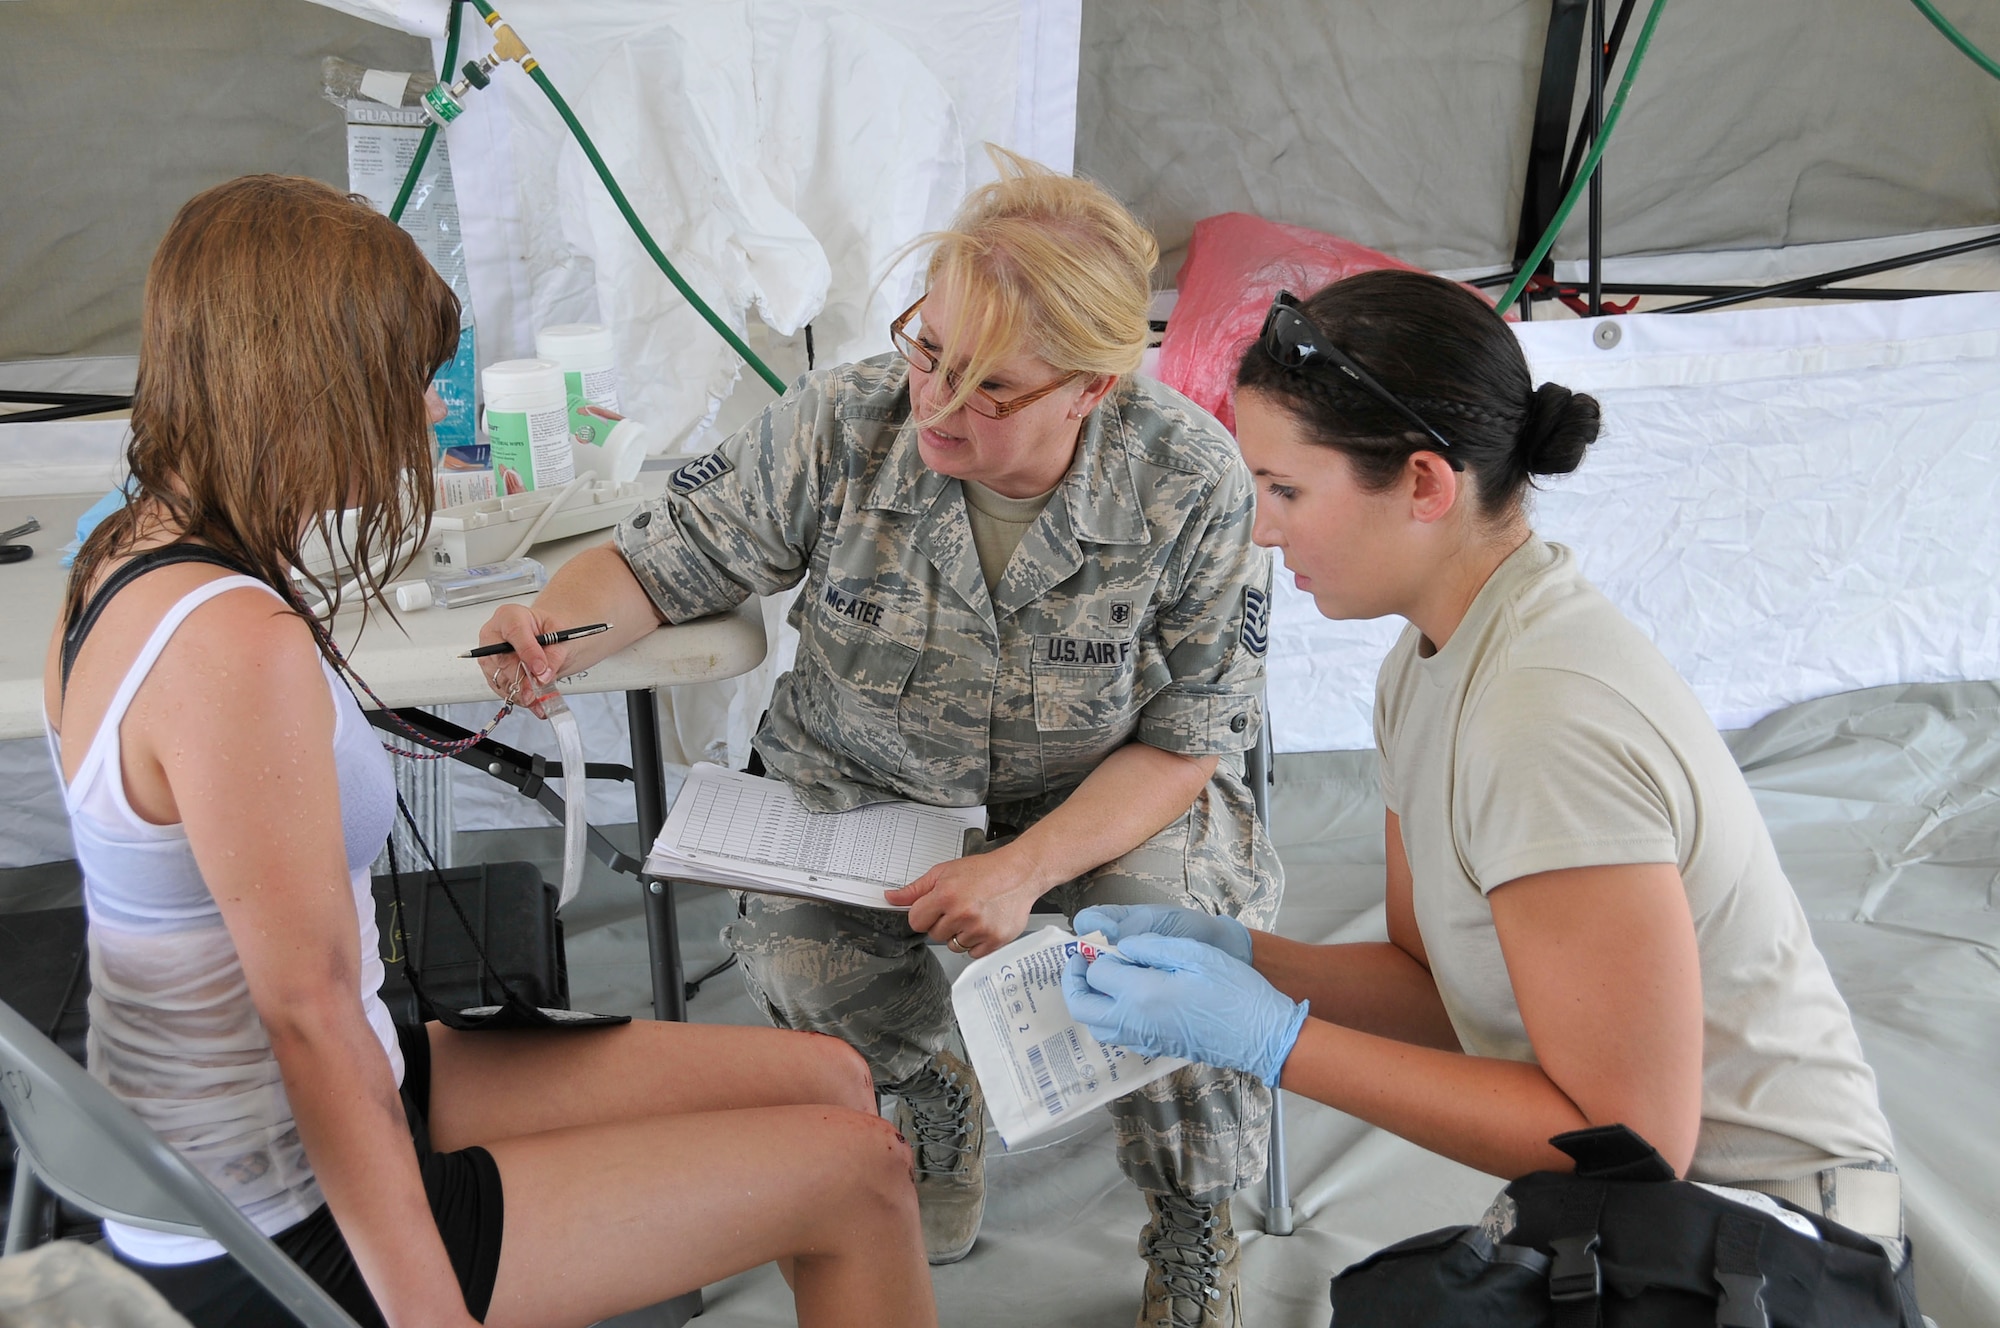 2nd Lt. Kelli Marietta and Tech. Sgt. Michael A. McAtee of the 181st Intelligence Wing/Medical Group/CERFP Element provide treatment to a wounded citizen during Patriot 2012 at Volk Field, Wis., July 18, 2012. (U.S. Air Force photo by Master Sgt. John Day/Released)